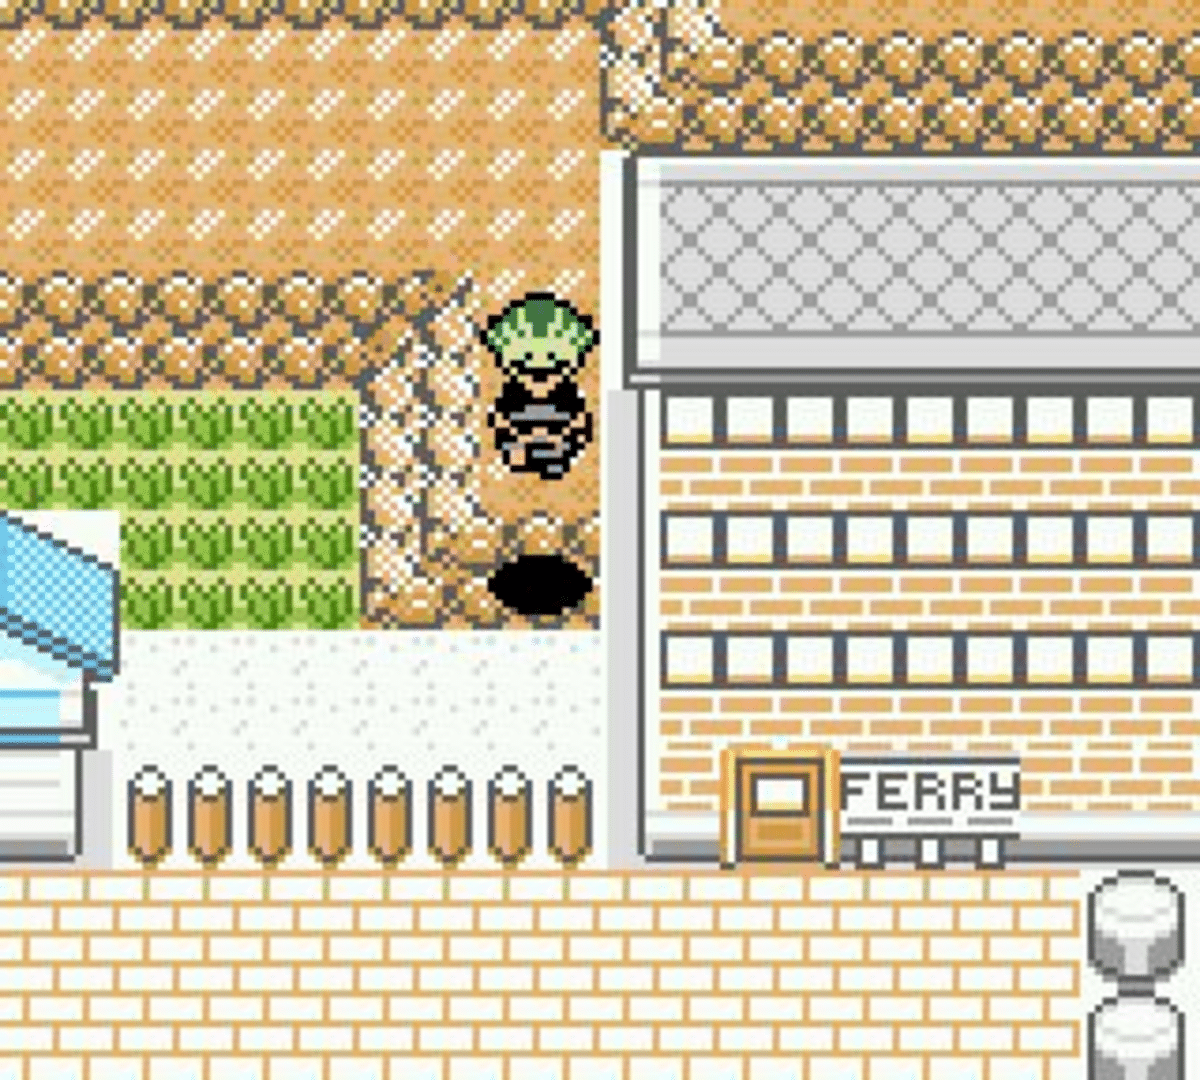 play pokemon crystal clear online